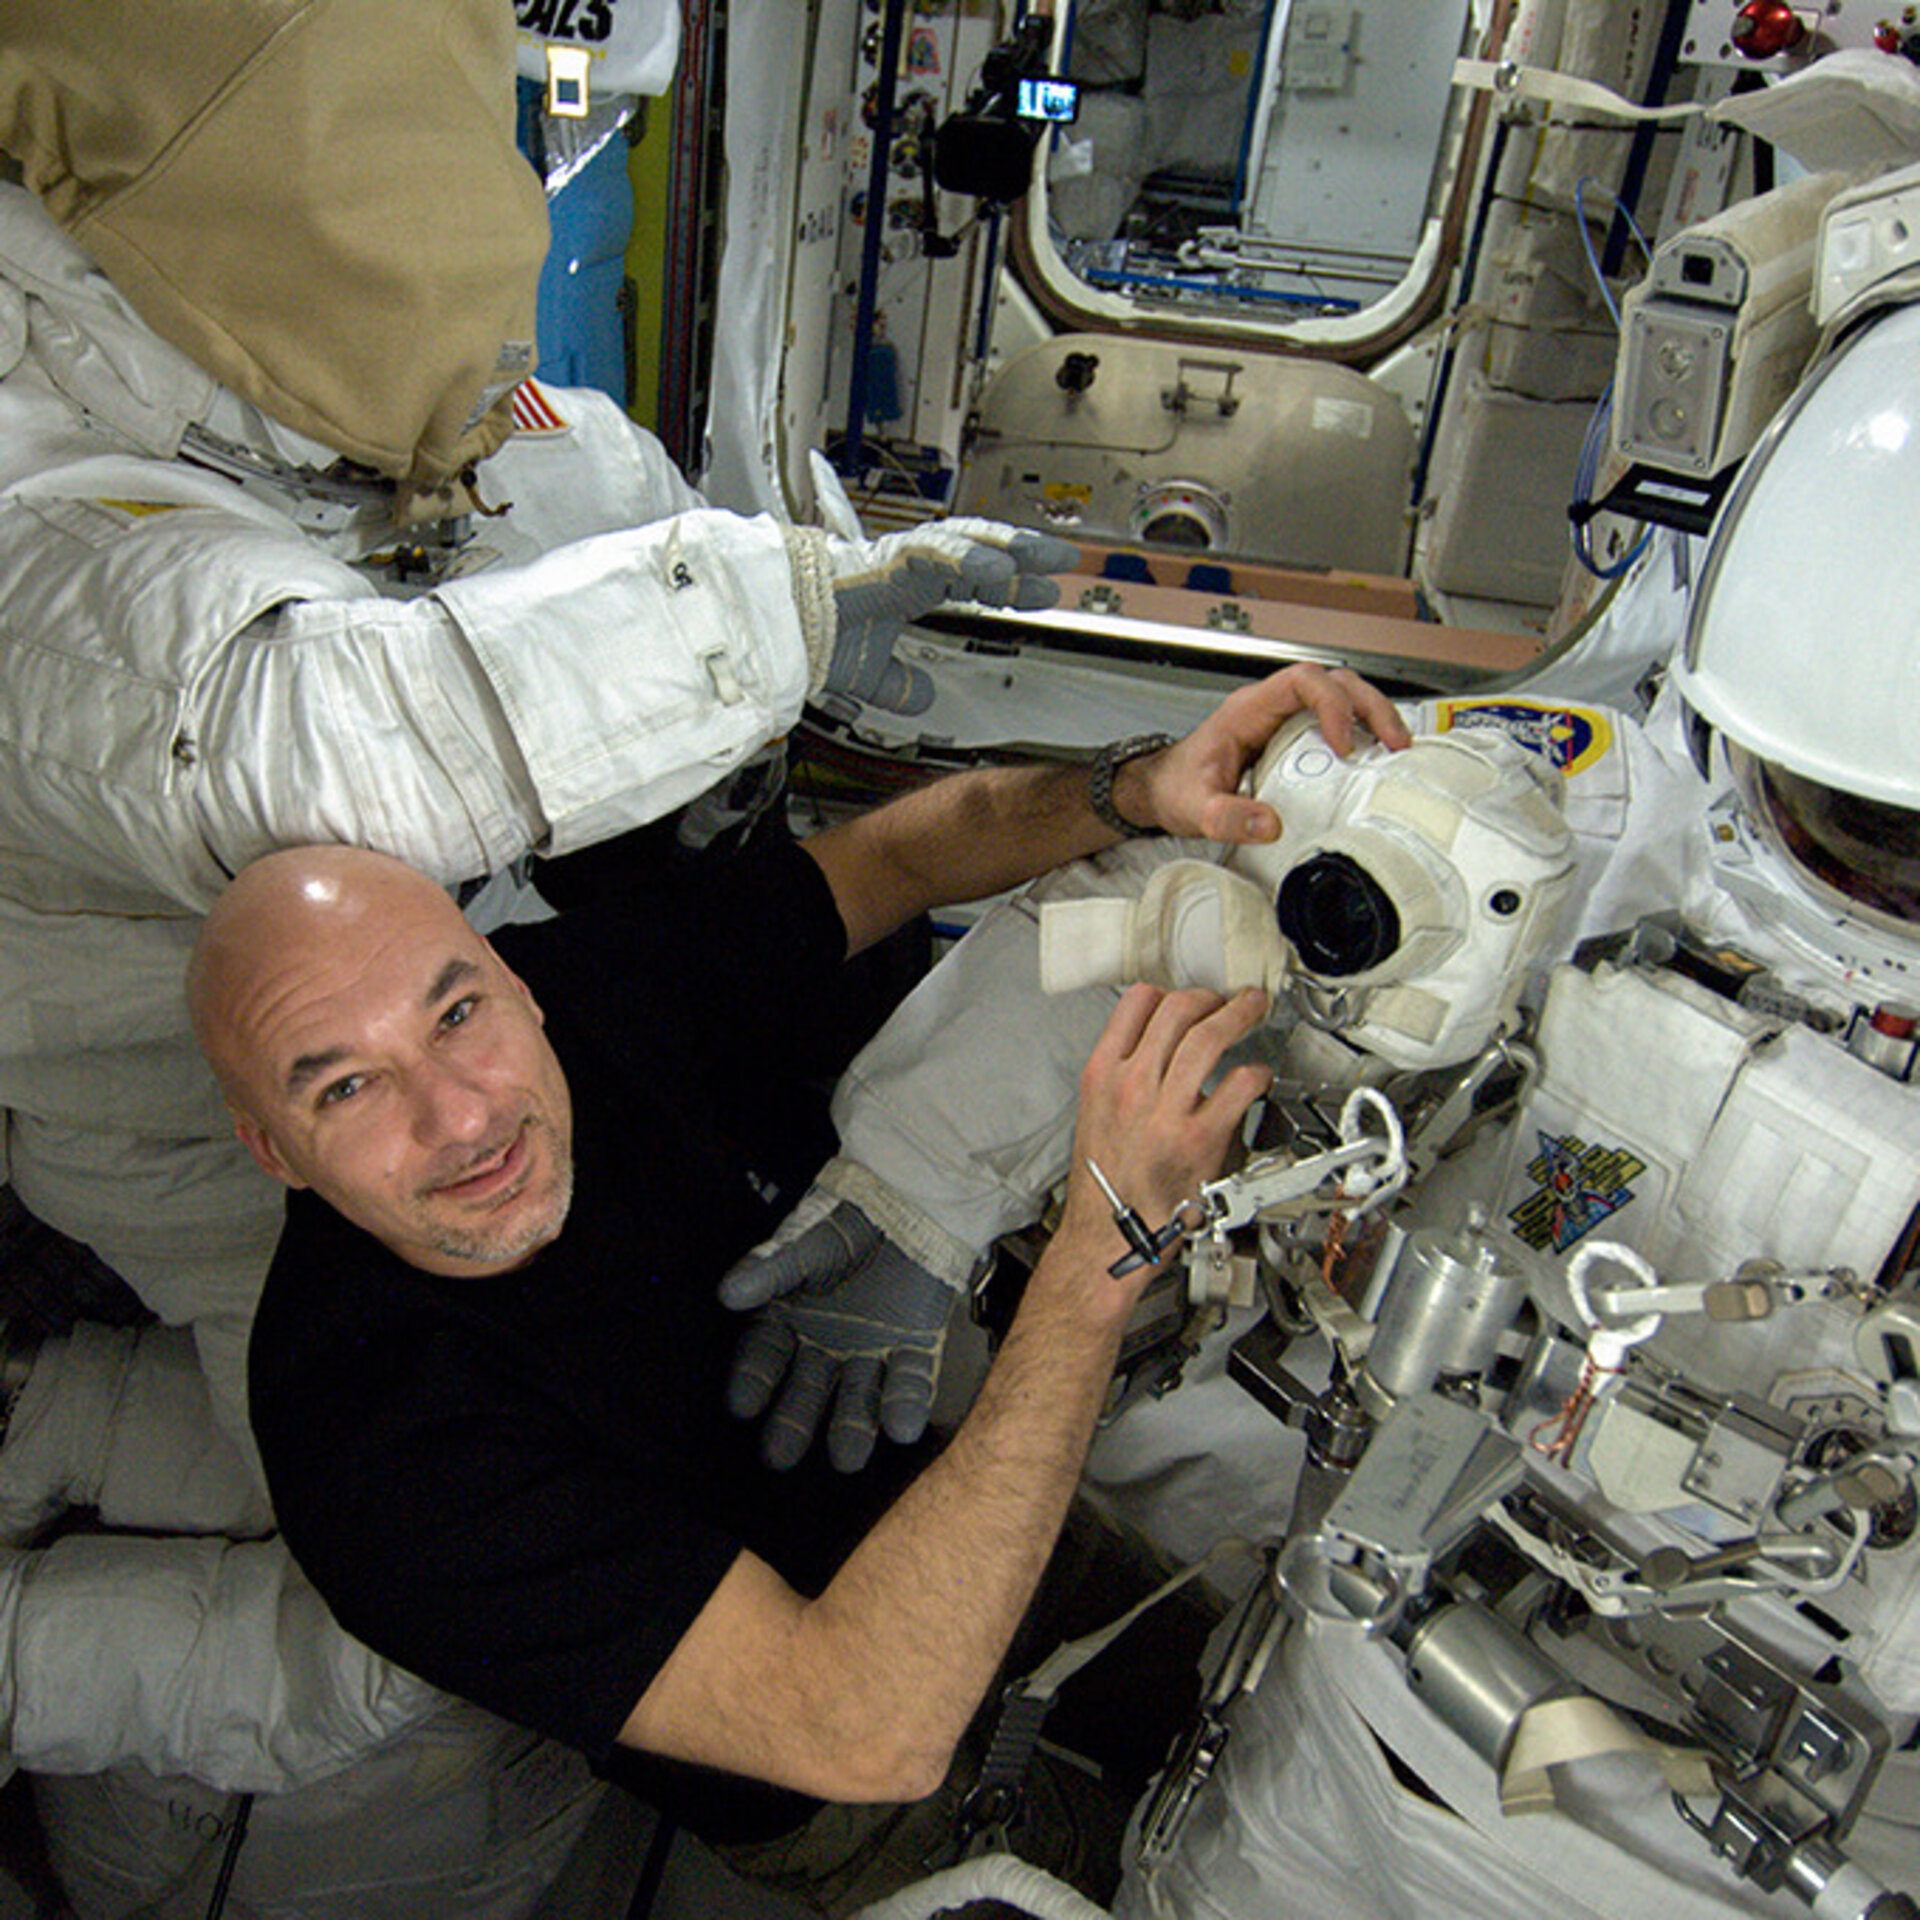 Human spaceflight and operations image of the week: embarking on the second EVA